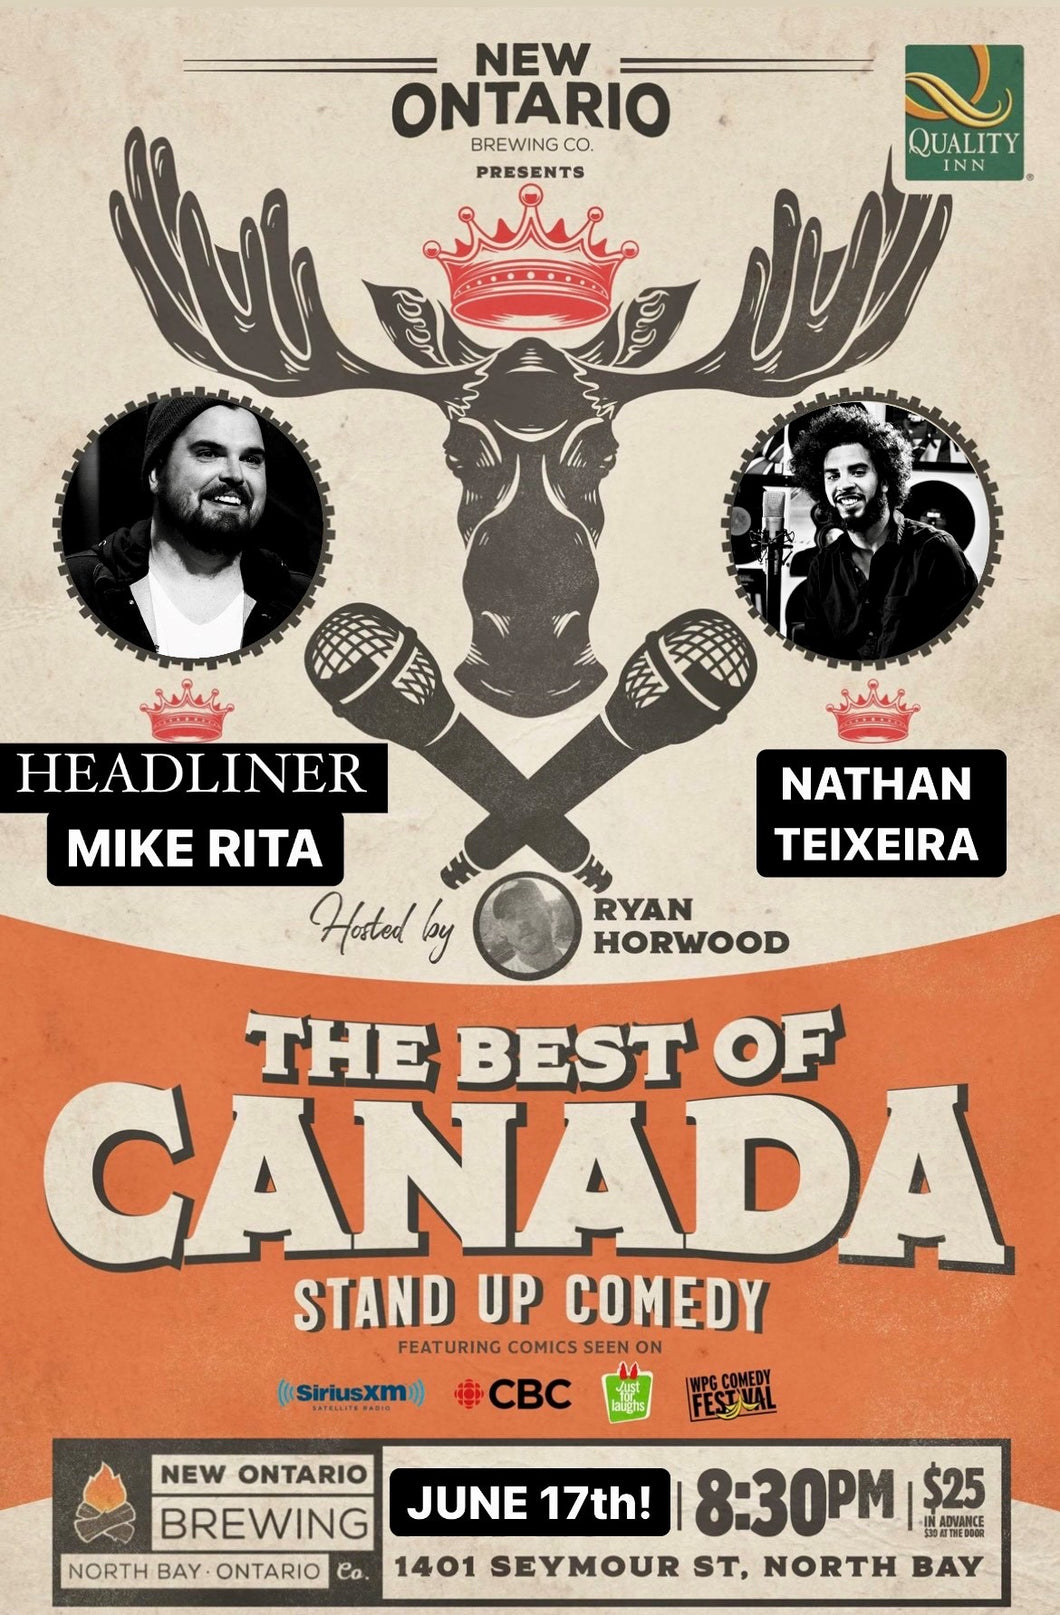 The Best of Canada Comedy - June 17